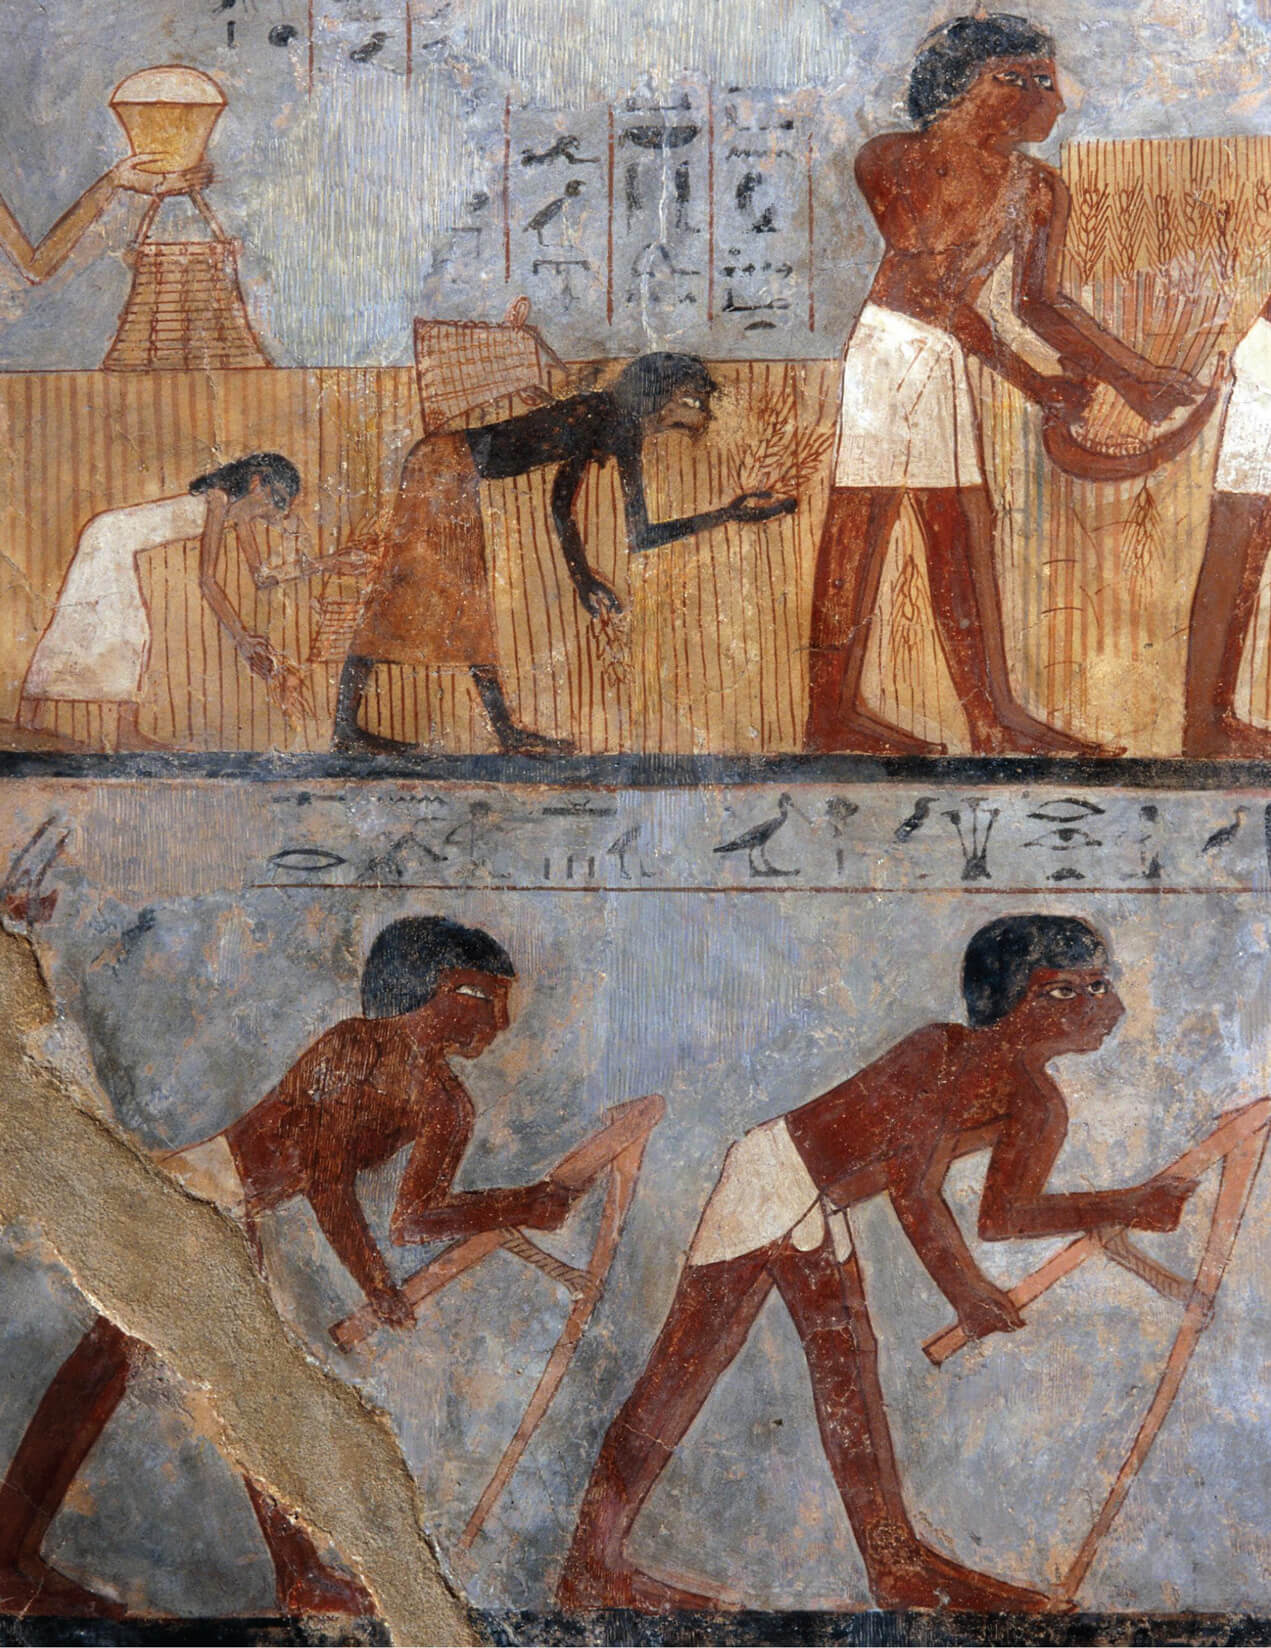 A fourteen fifty BC mural painting from the tomb of Unsu, a grain accountant in the early Eighteenth Dynasty. The fragment shown displays two people at work on agricultural operations in Thebes, which Unsu supervised. 